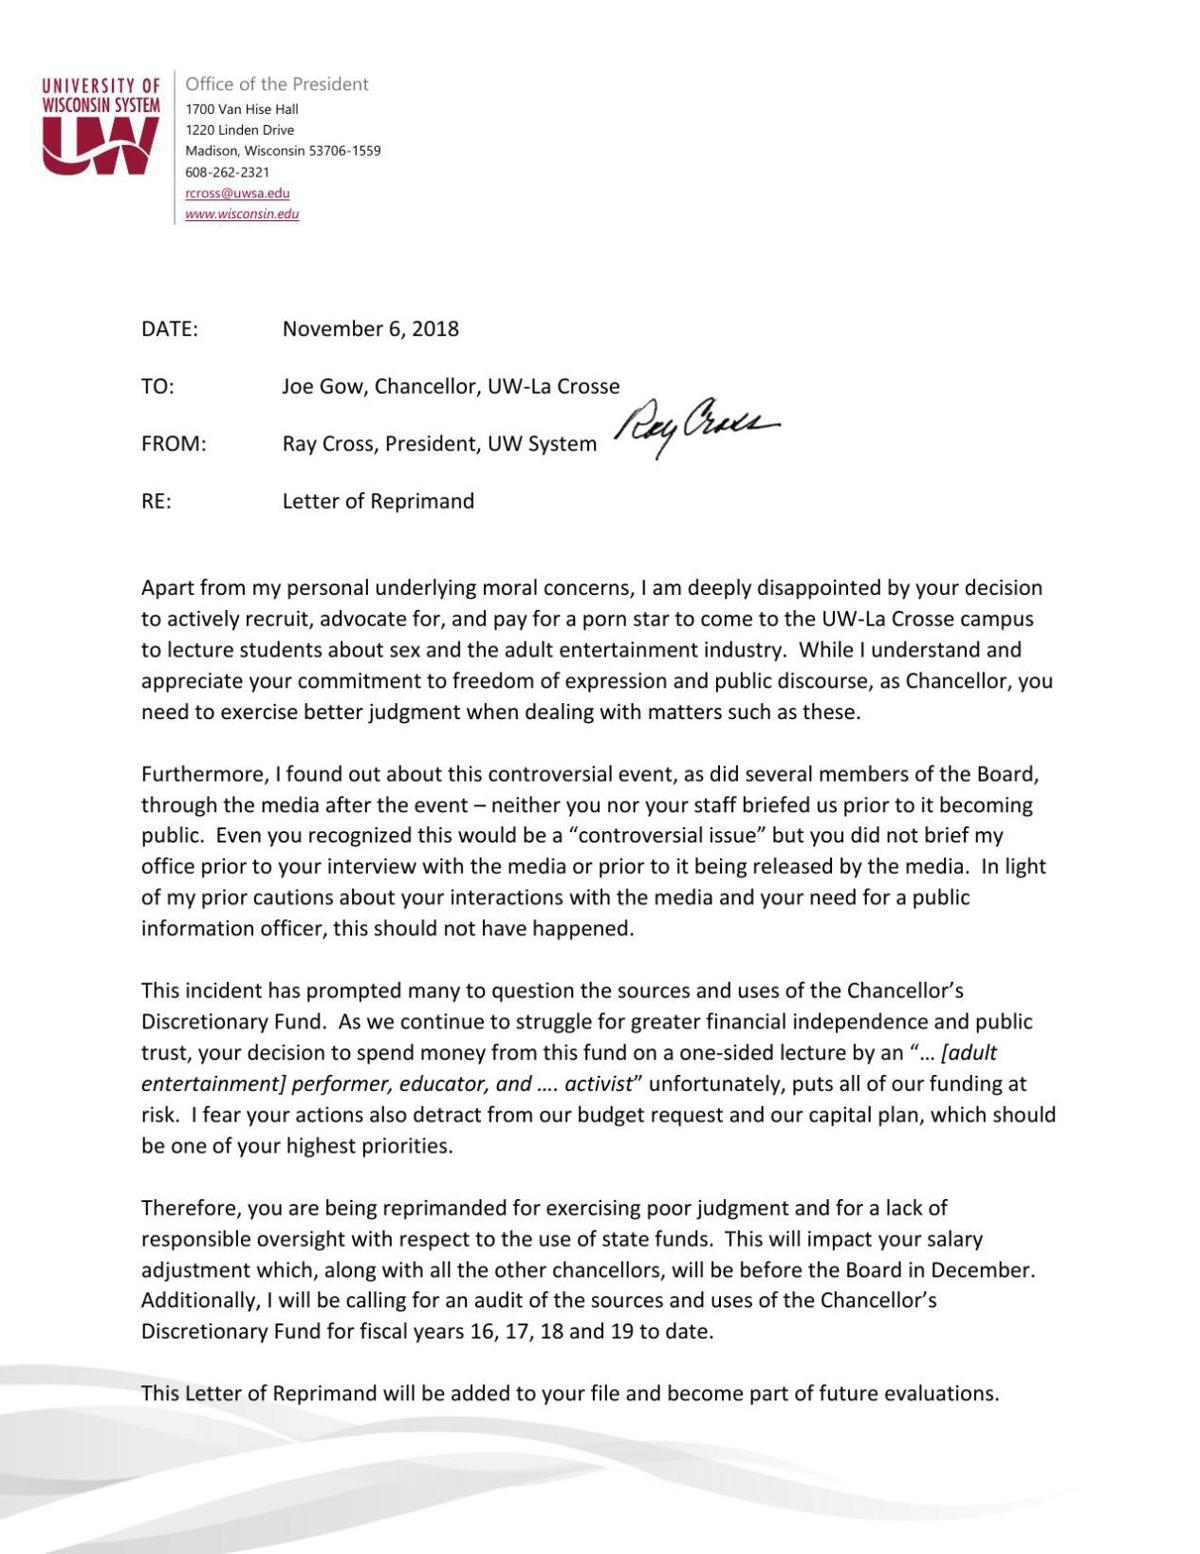 Public Letter Of Reprimand from bloximages.chicago2.vip.townnews.com